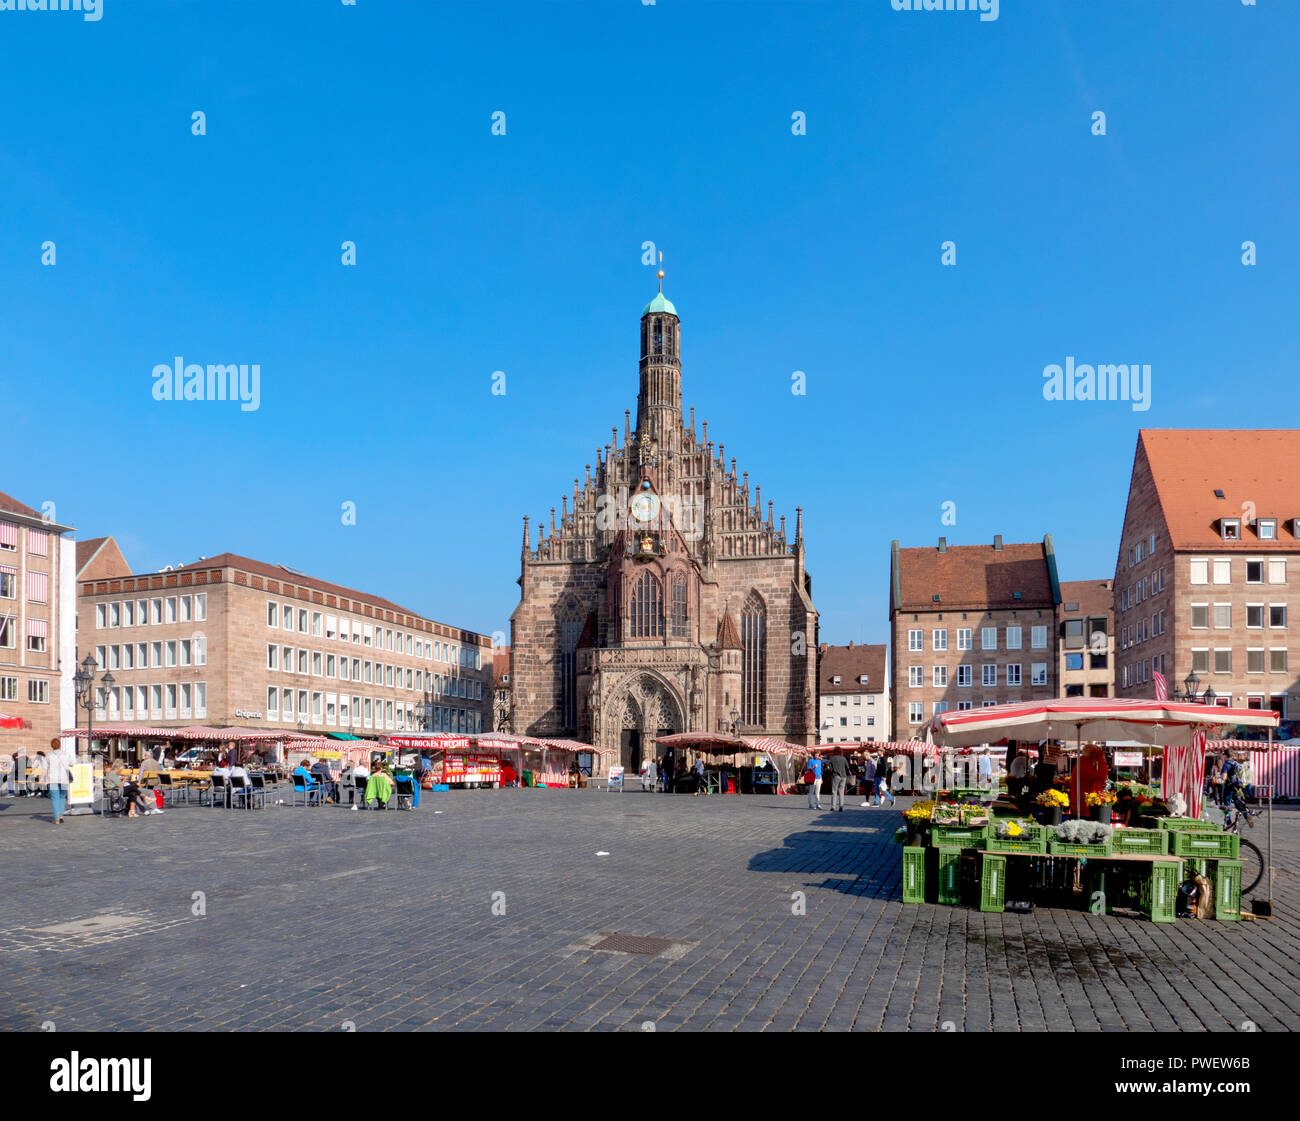 The Frauenkirche church in Nuremberg - Nurnberger, Germany. First opened in 1361 and stands in the Hauptmarkt. Stock Photo